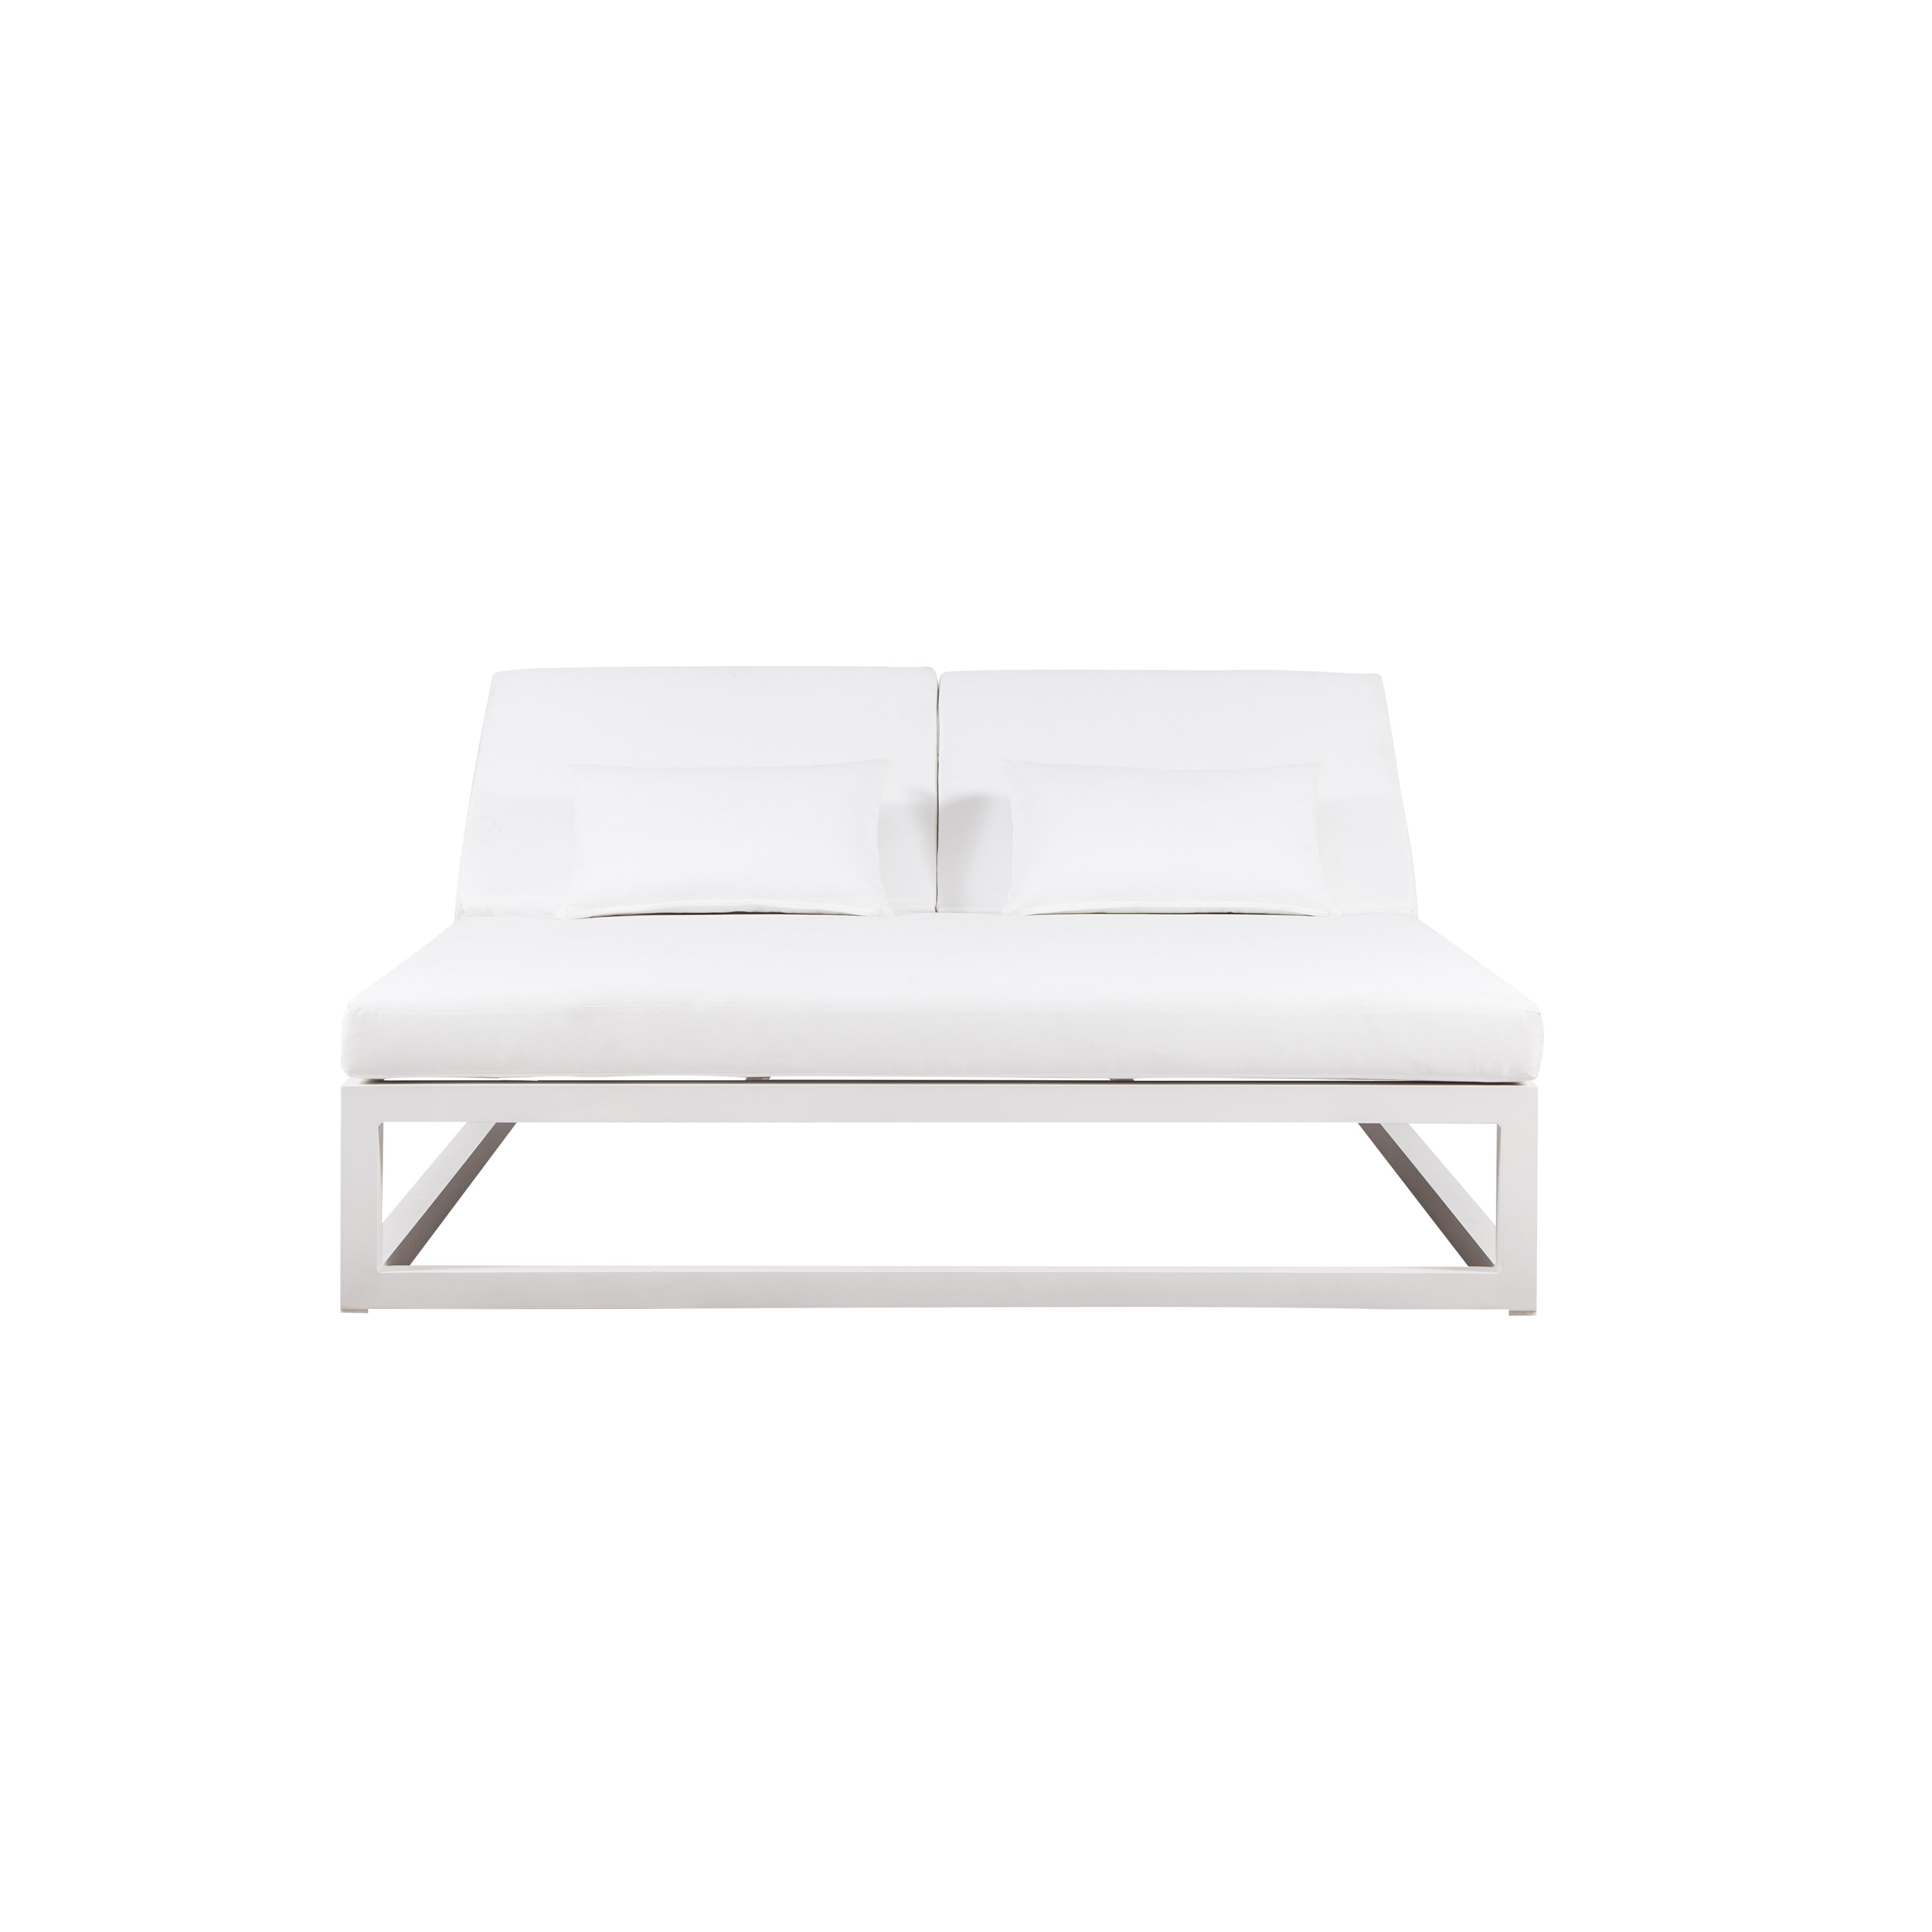 Reen alu.duebel daybed S6